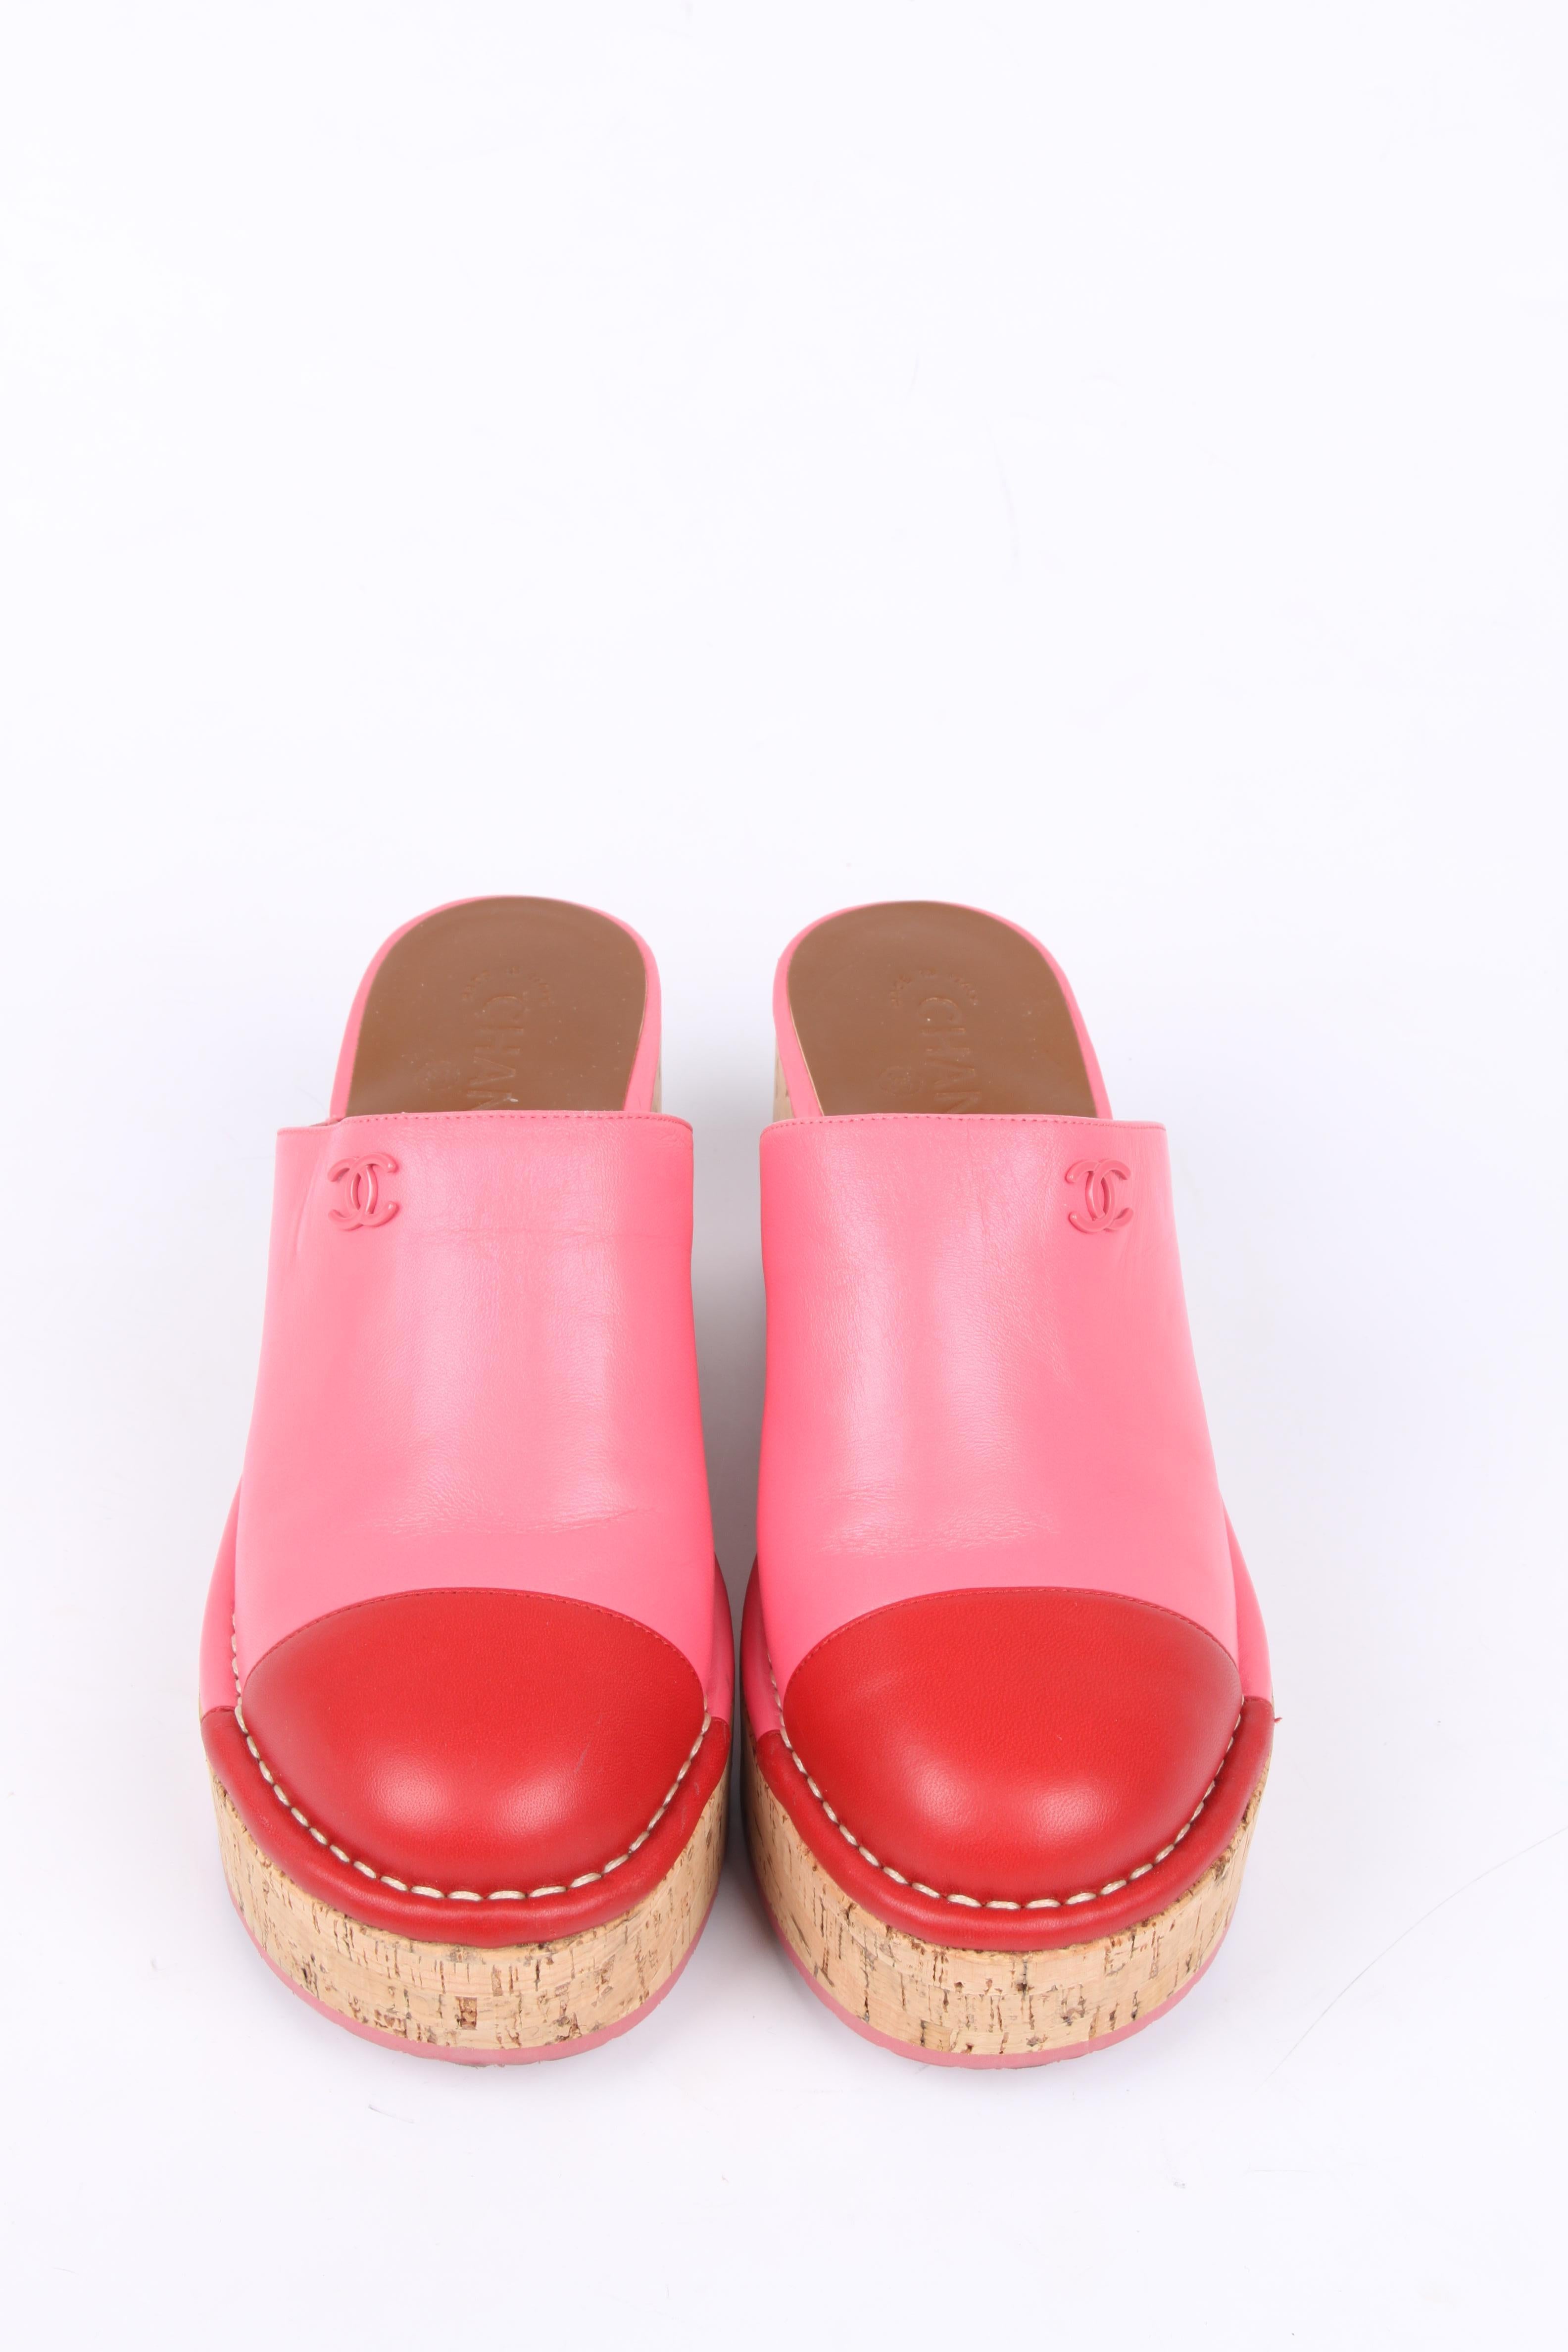 Cheerful mules by Chanel in red and pink leather.

The sole is made of cork, the heel measures 8 centimeters and the platform is 3,5 centimeters high. The cap toe is crafted from red leather and the rest is executed in pink leather. 

Both shoes are